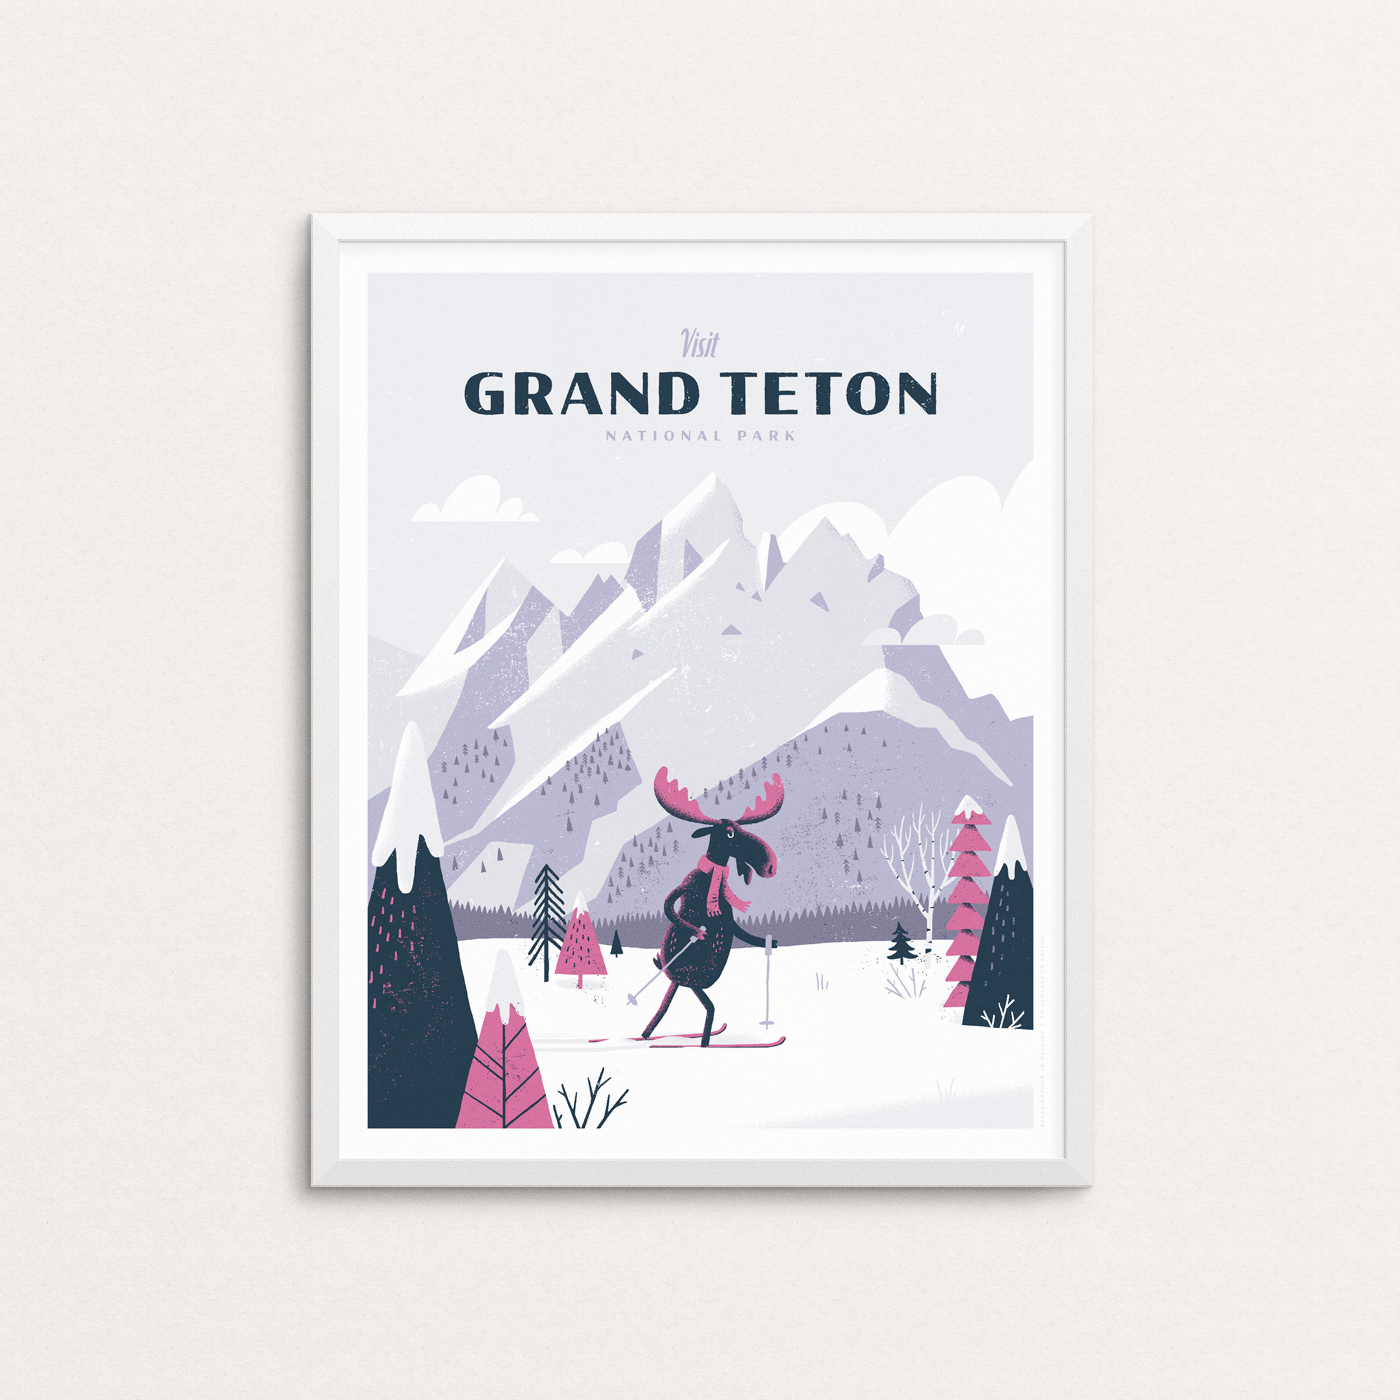 Moose cross country skiing at Grand Teton National Park in Wyoming. Poster show in white frame.